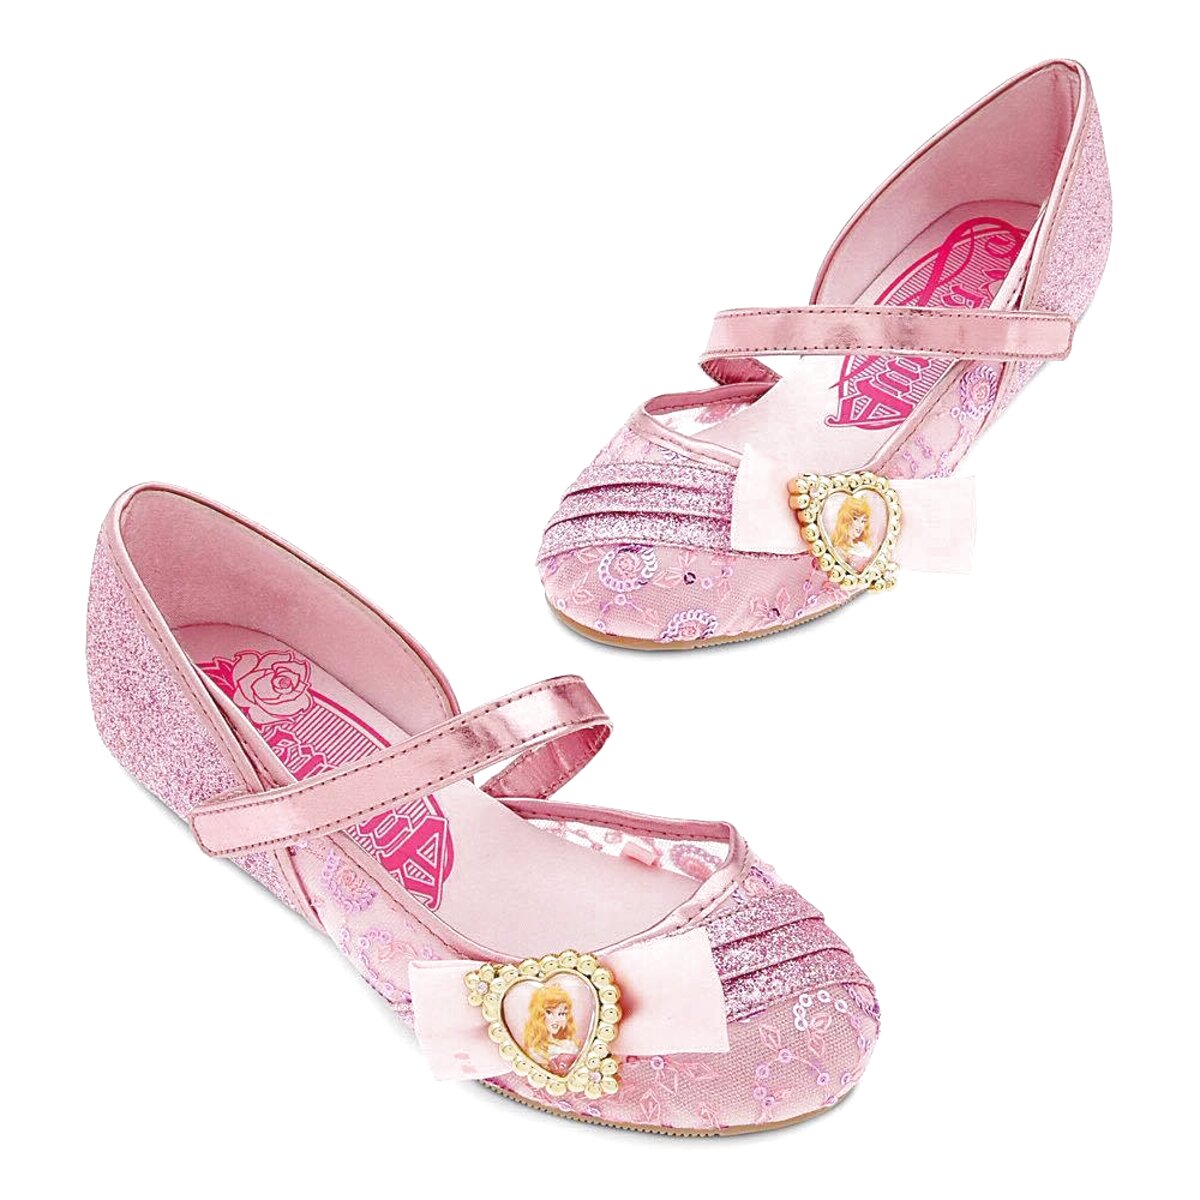 Sleeping Beauty Shoes for sale in UK | View 71 bargains